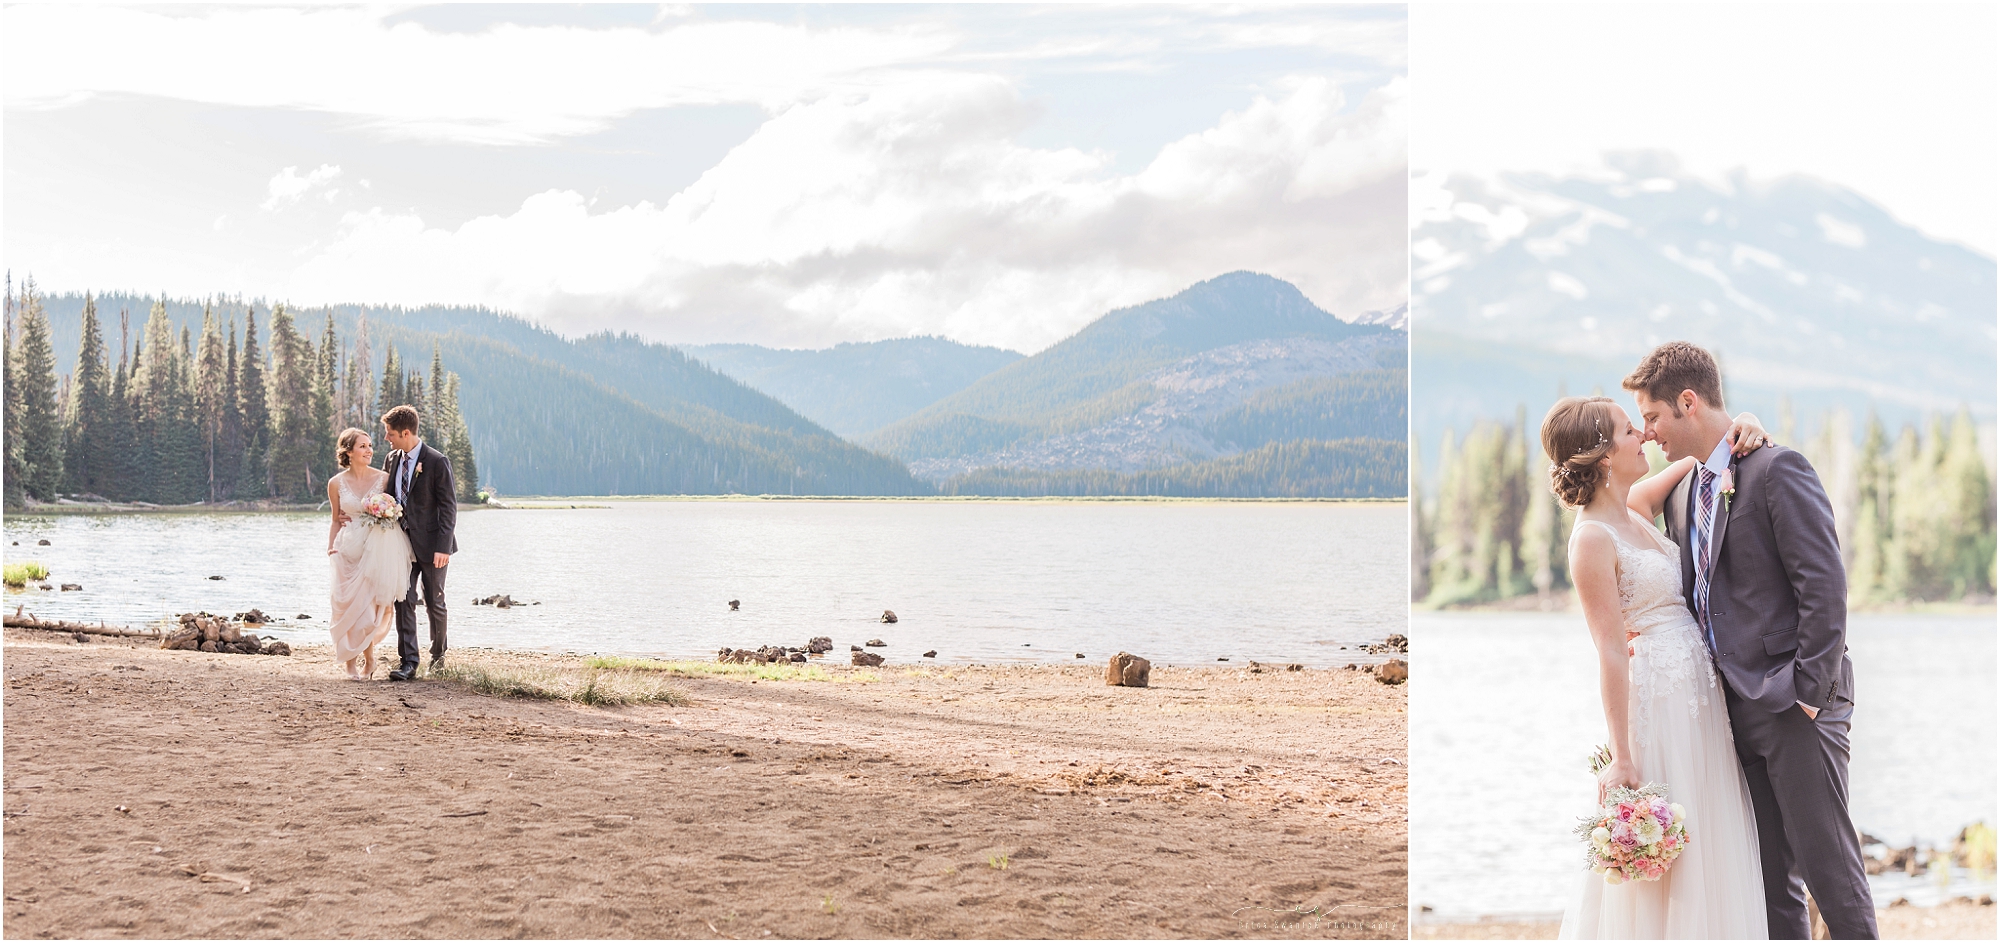 Gorgeous bride and groom at an intimate mountain elopement by Bend wedding photographer Erica Swantek Photography